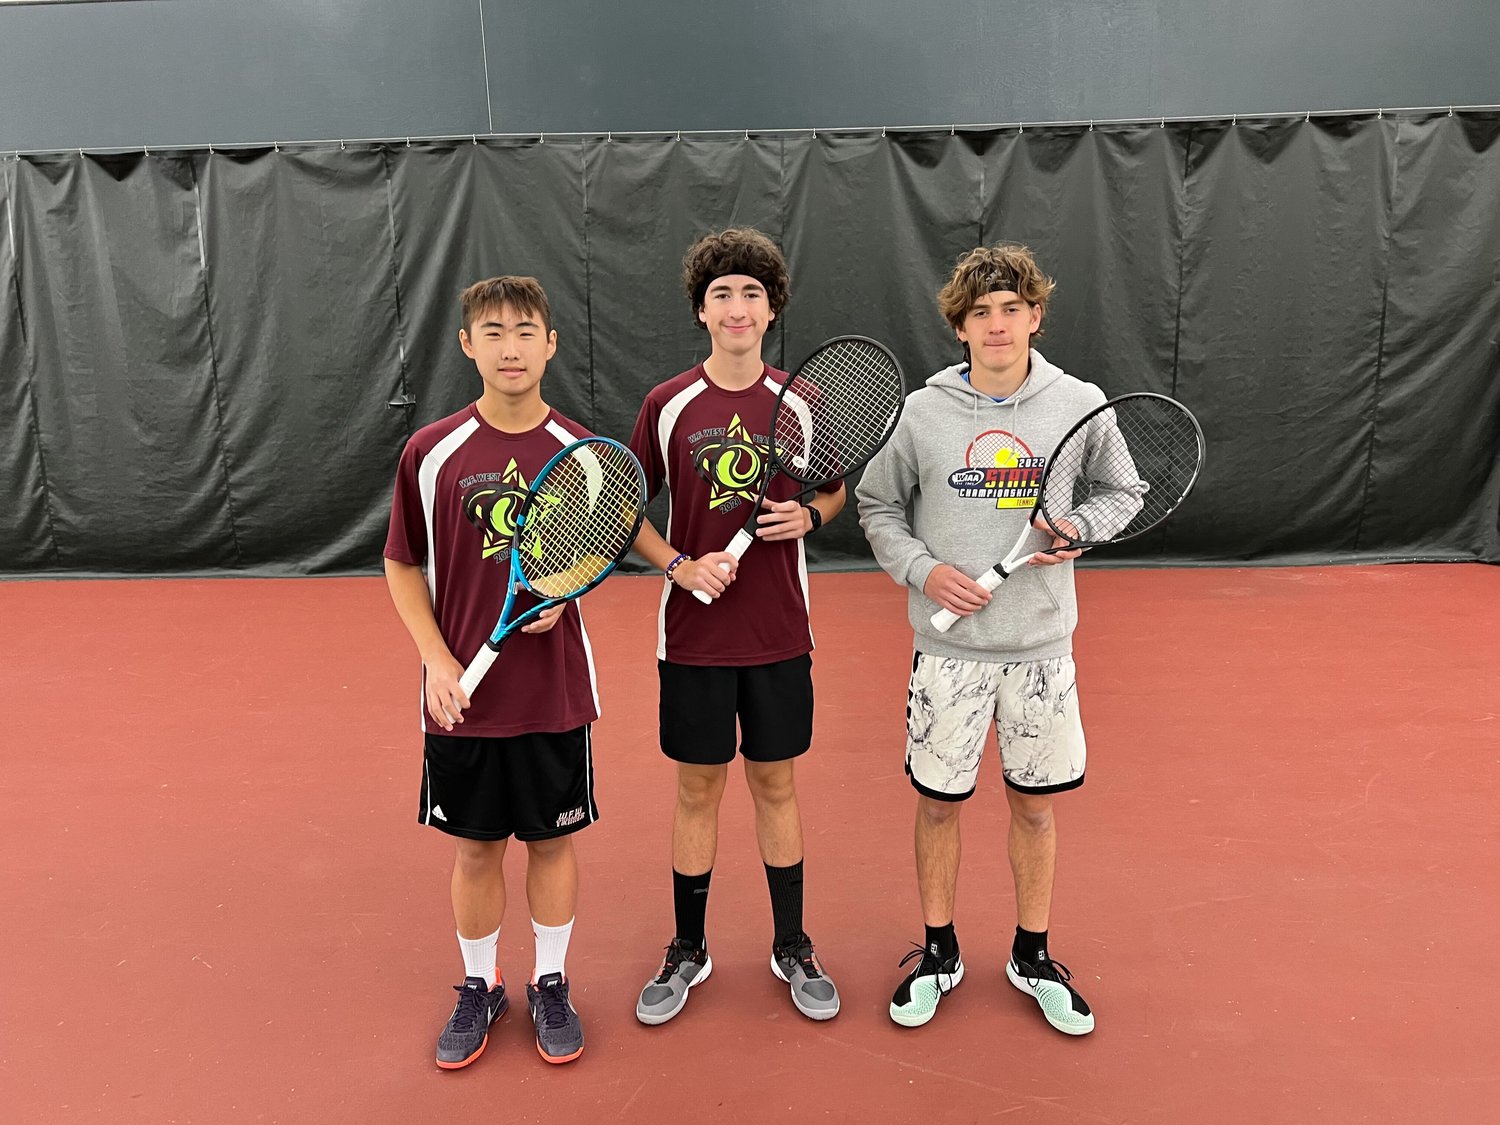 W.F. West tennis players Javyn Han, Bryce Kuykendall, and Aaron Boggess pose for a photo after the 2A District 4 Boys Tennis tournament Oct. 28.